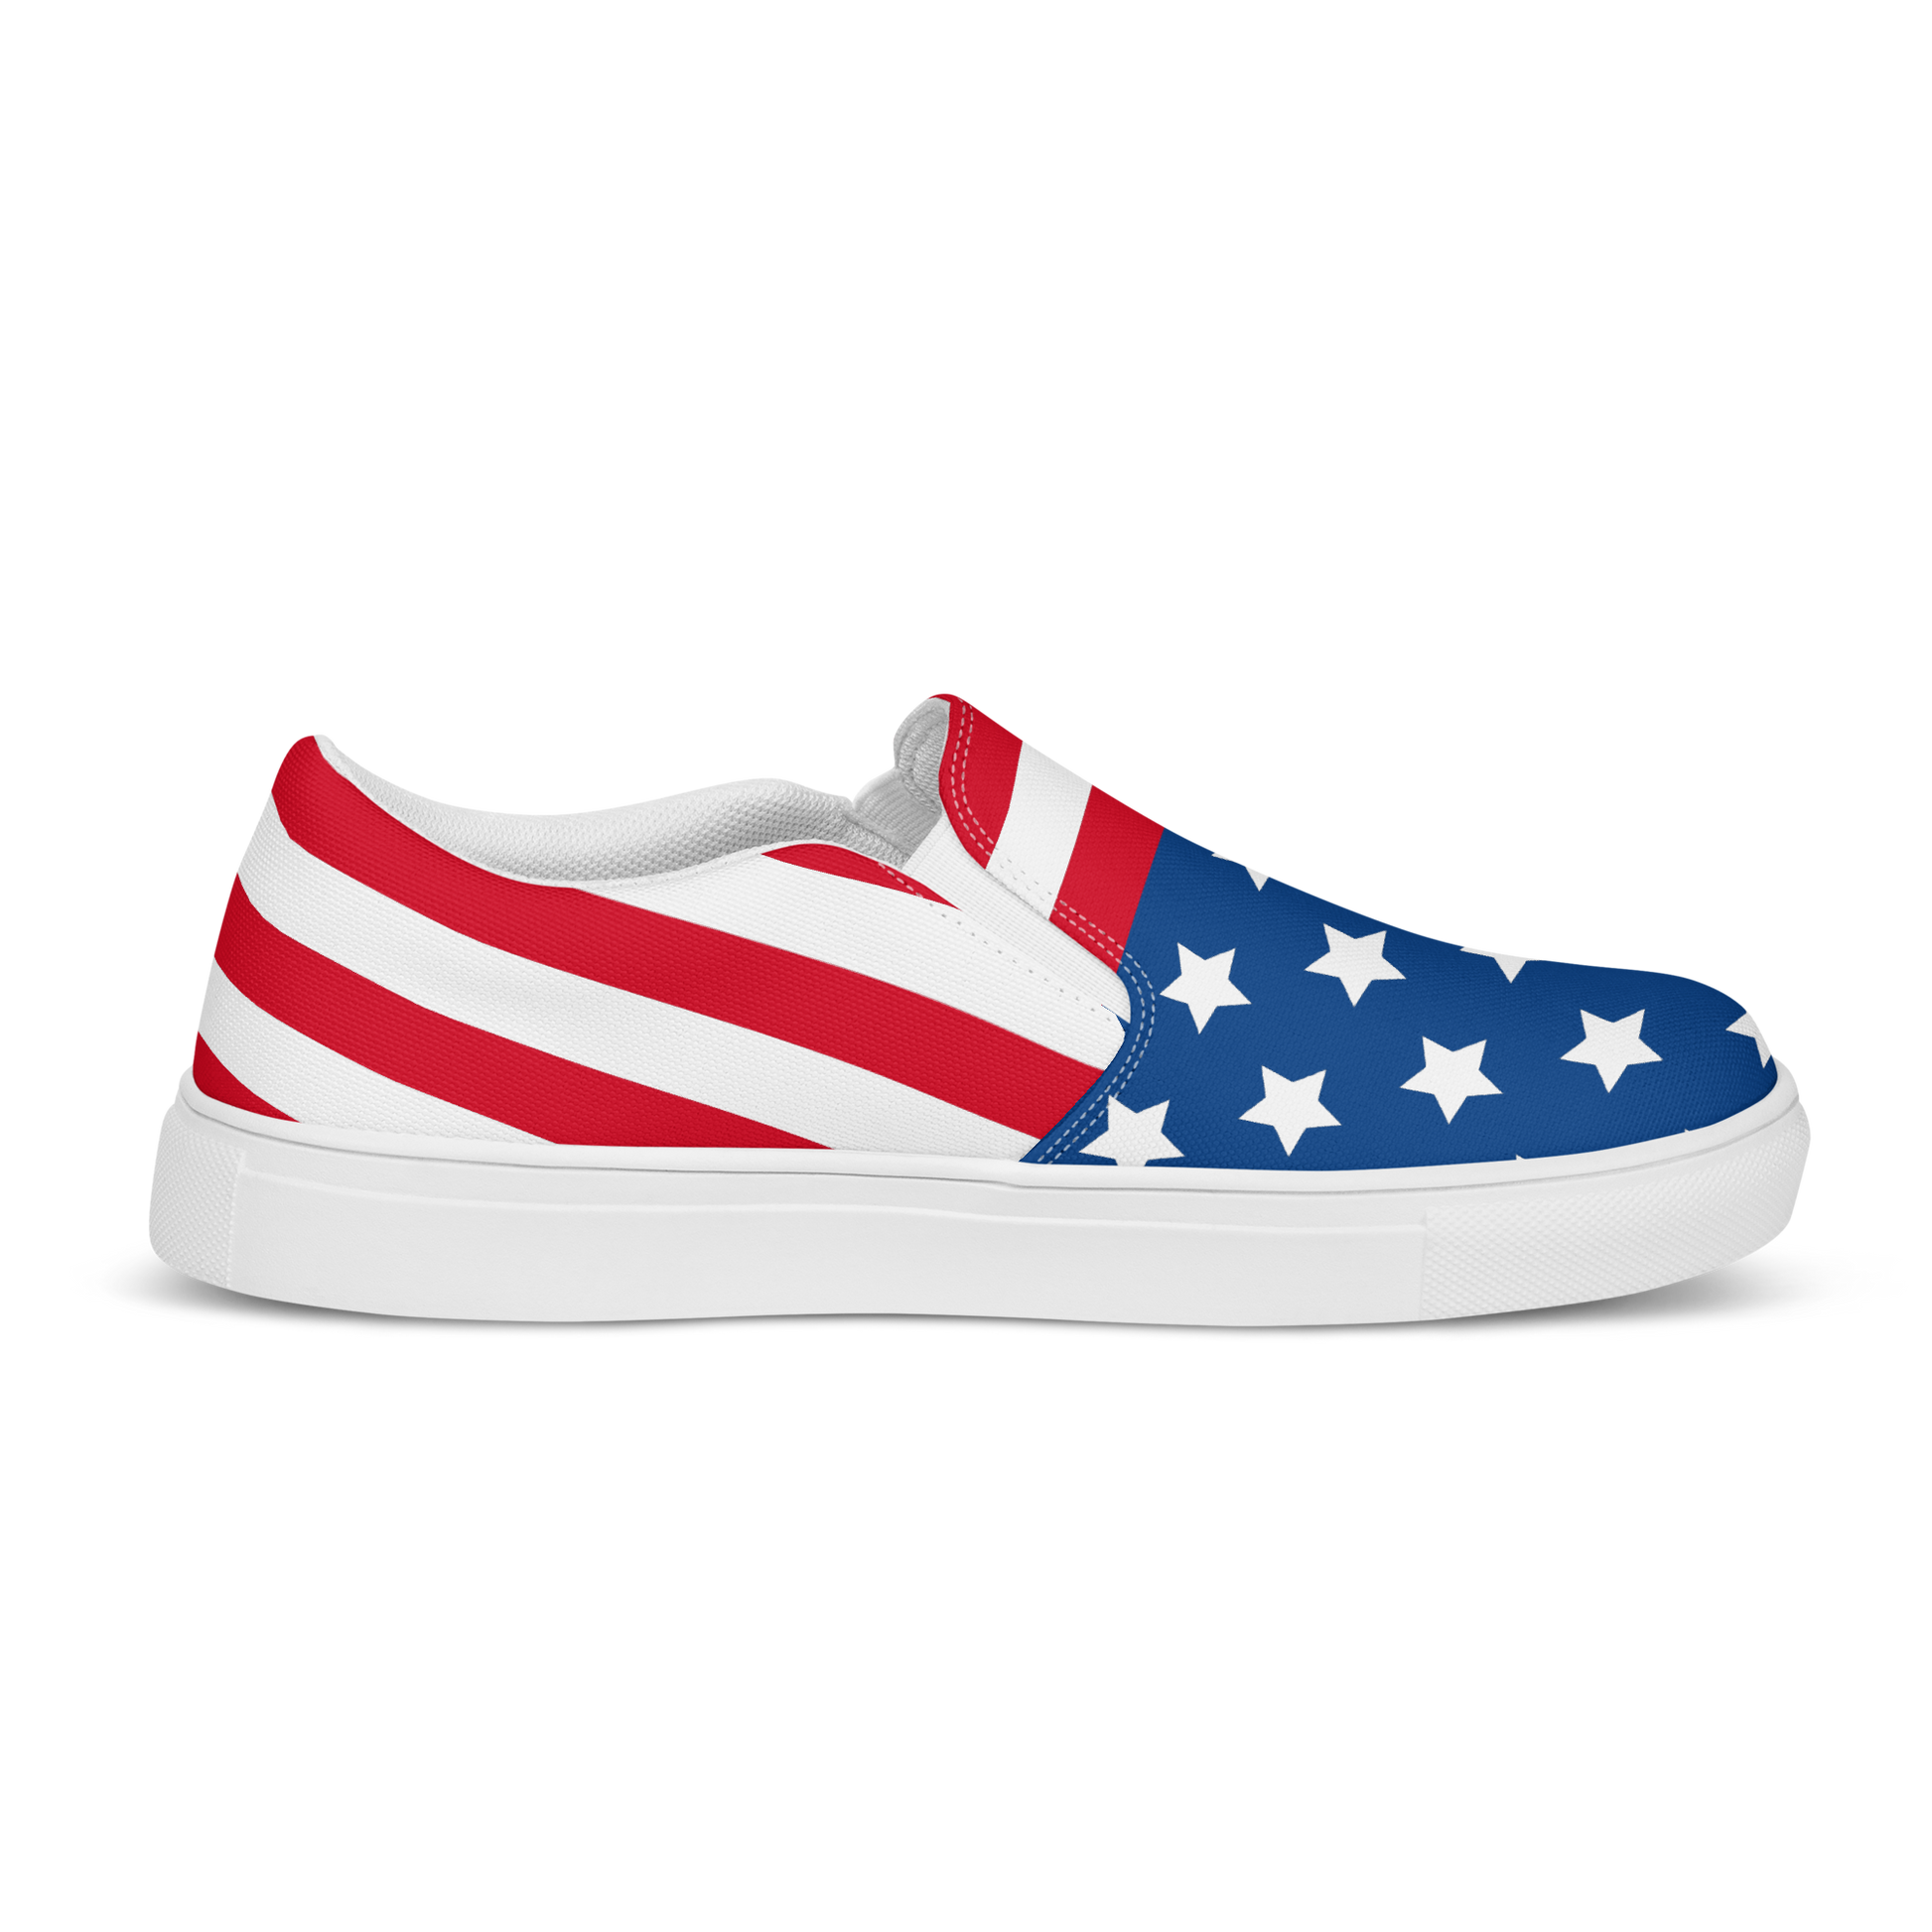 American Flag Shoes